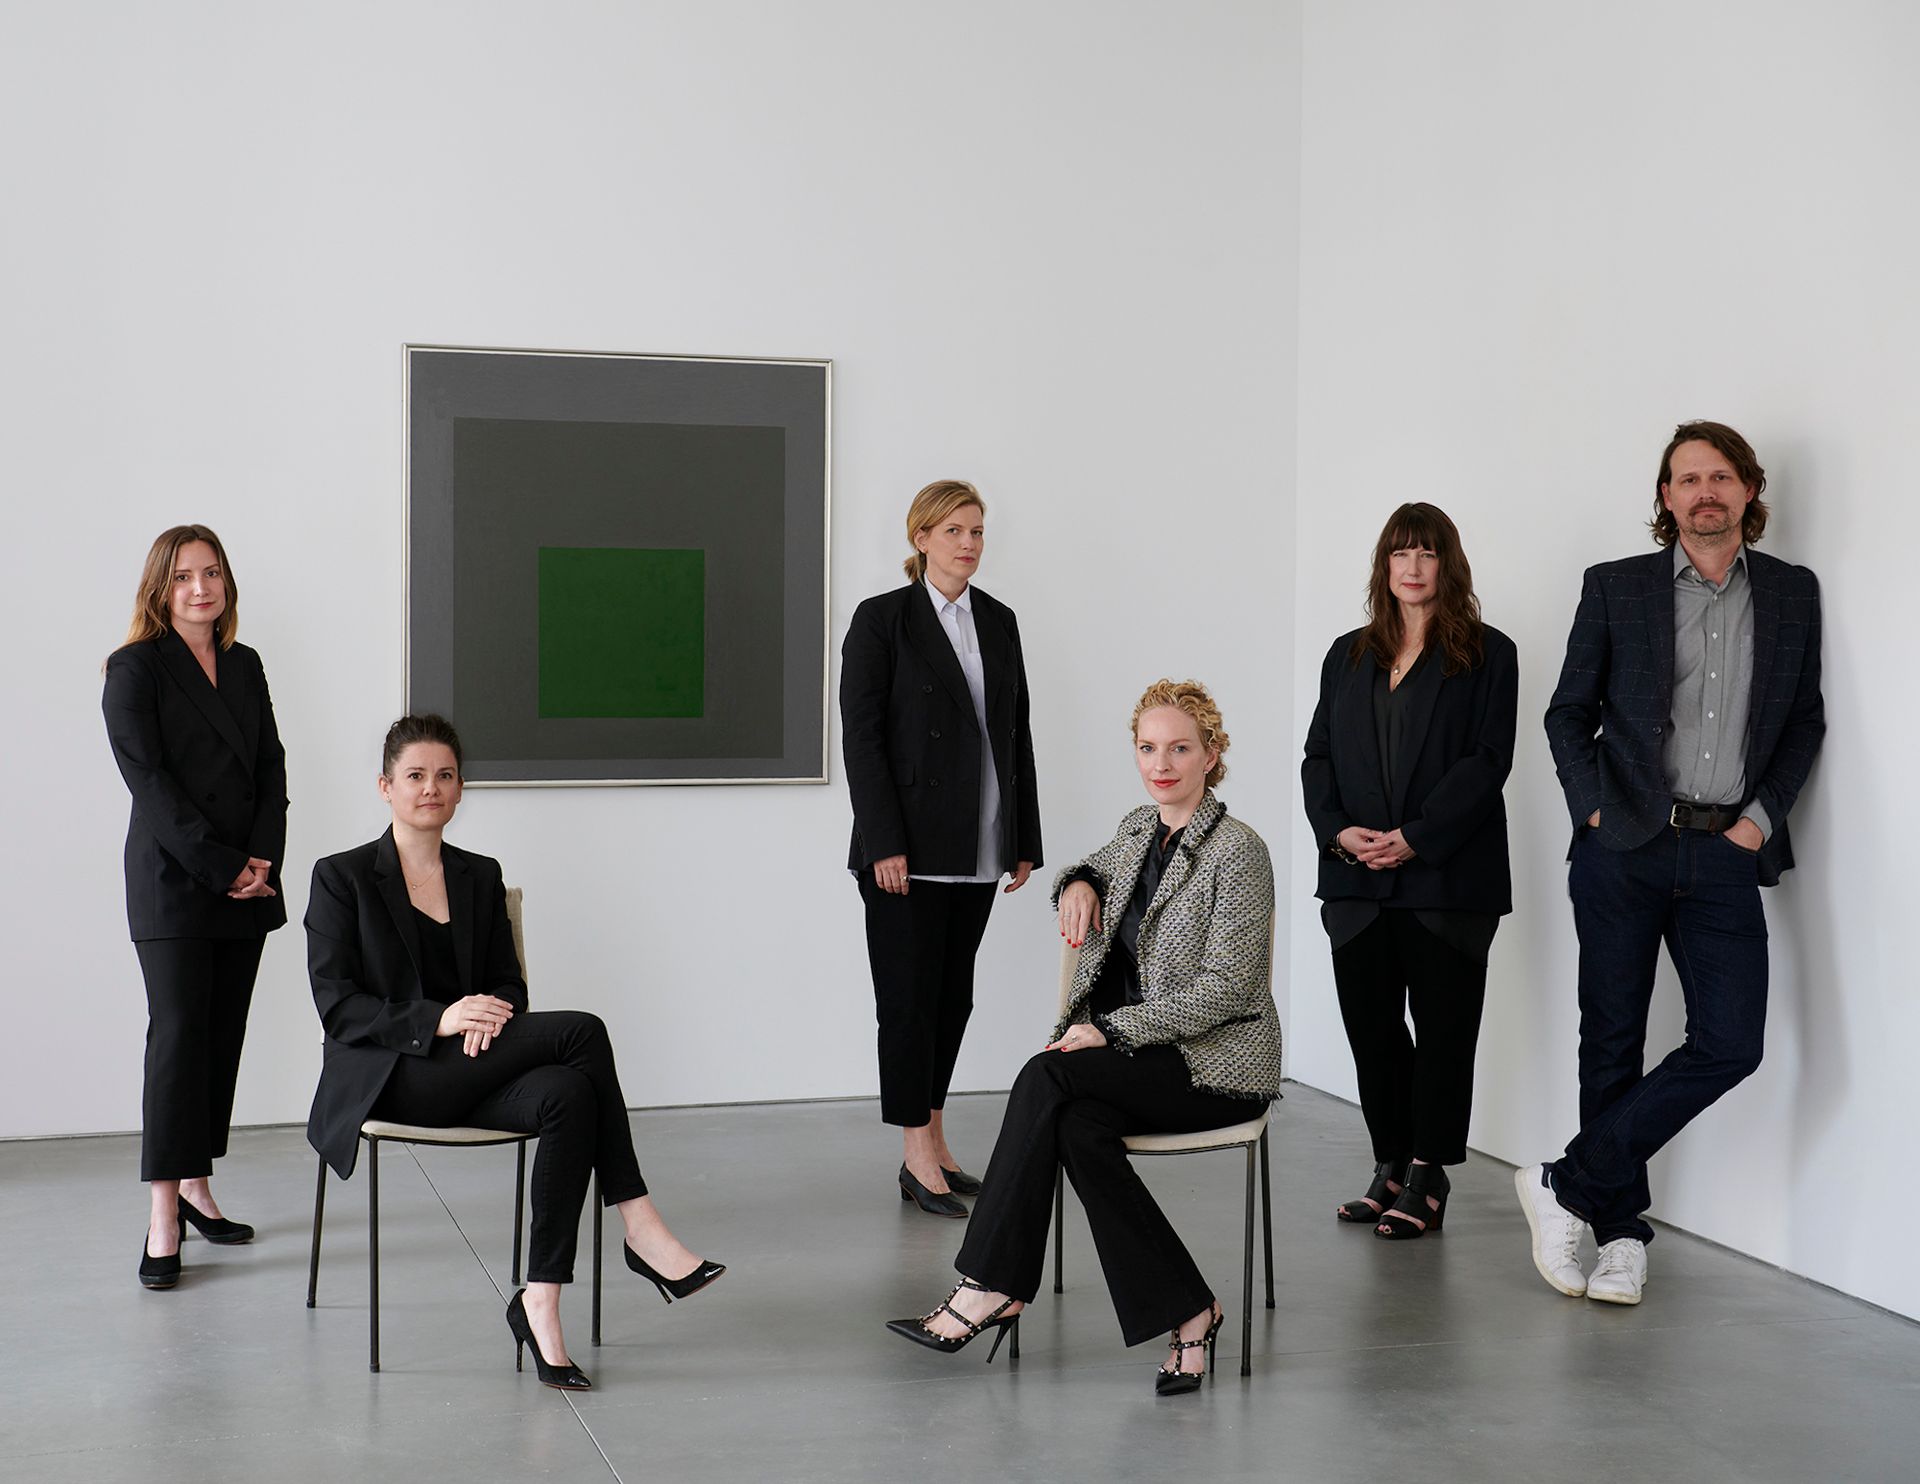 David Zwirner's secondary market department (from left to right): Katherine Lukacher, the gallery’s director of secondary market online sales; Meghan Hill, the gallery’s senior director of sales; Alexandra Whitney, who heads the gallery’s global research department; Kristine Bell, a senior partner who leads the department; Kelly Reynolds, the gallery's senior director of operations, exhibitions and registration; and Cy Amundson, director of art handling. Artwork: Josef Albers, Homage to the Square: Embedded, 1963 Artwork: © The Josef and Anni Albers Foundation / Artists Rights Society (ARS), New York. Courtesy The Josef and Anni Albers Foundation and David Zwirner. Photo: Jason Schmidt
